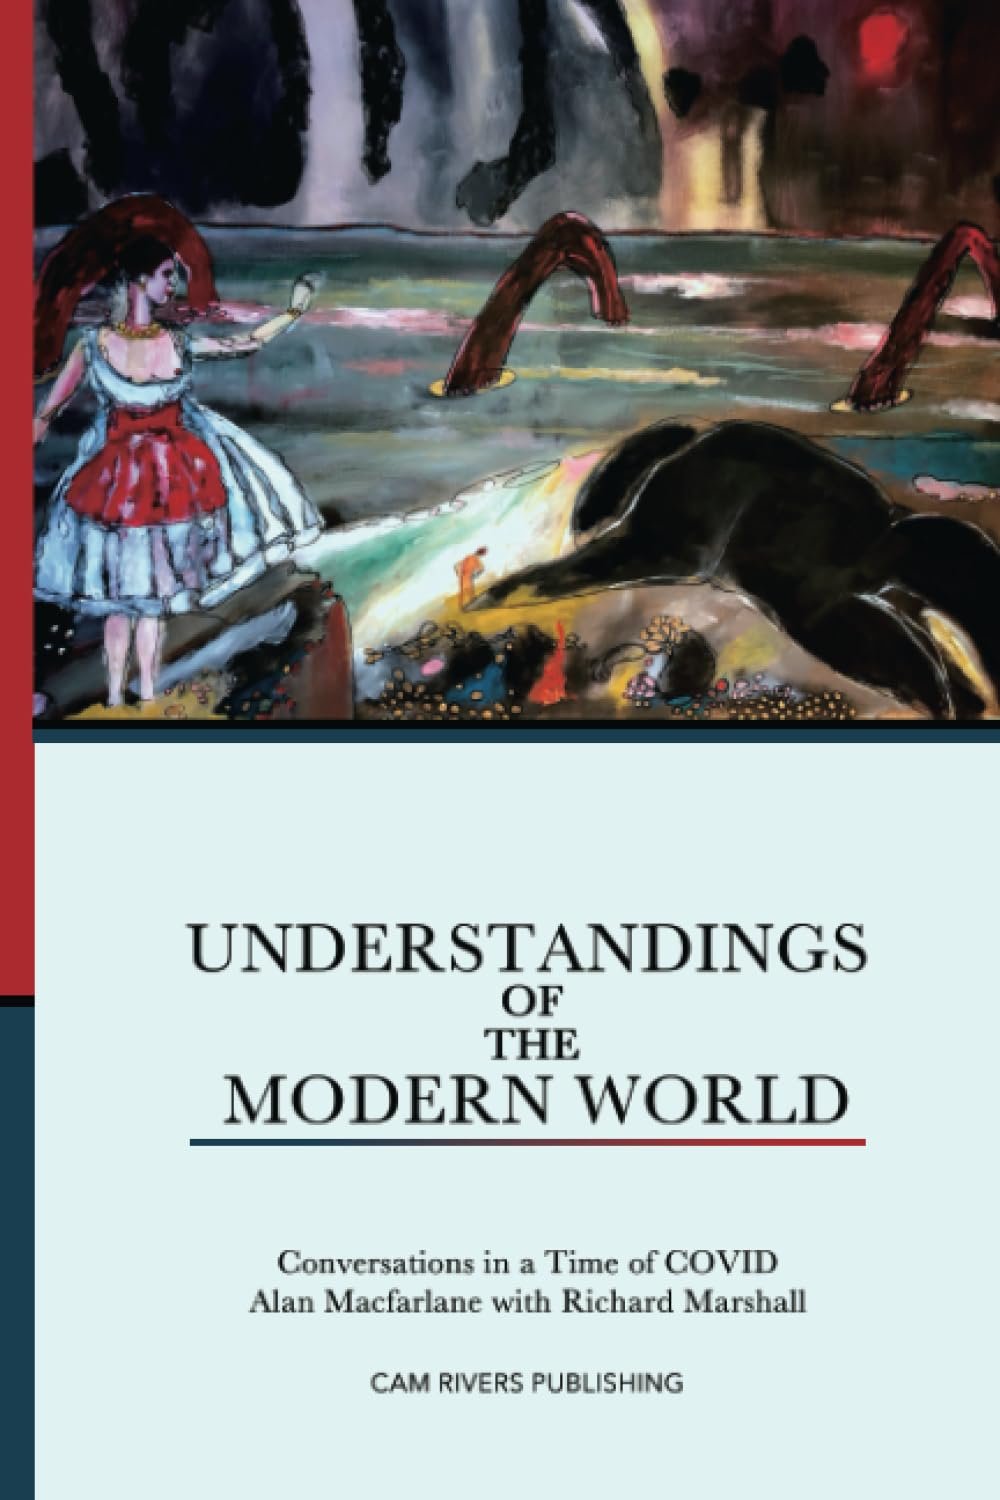 Understandings of the Modern World: Conversations in a Time of COVID Paperback Out on 13 July